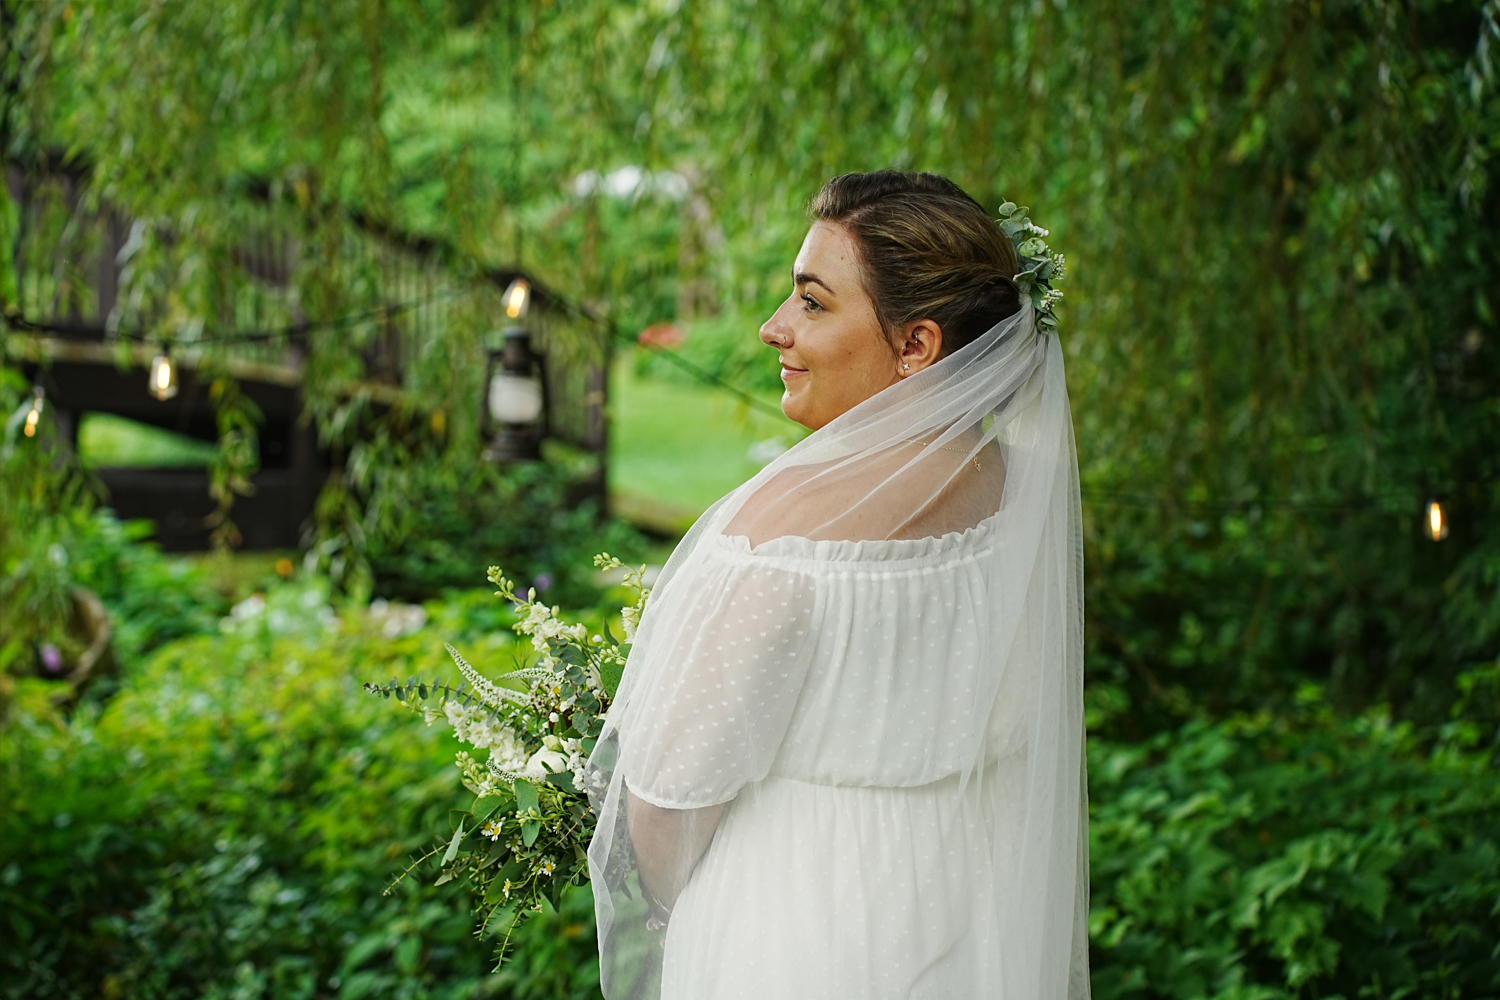 Profile portrait of a bride under a willow tree in the summer with her veil laying gently on her shoulder